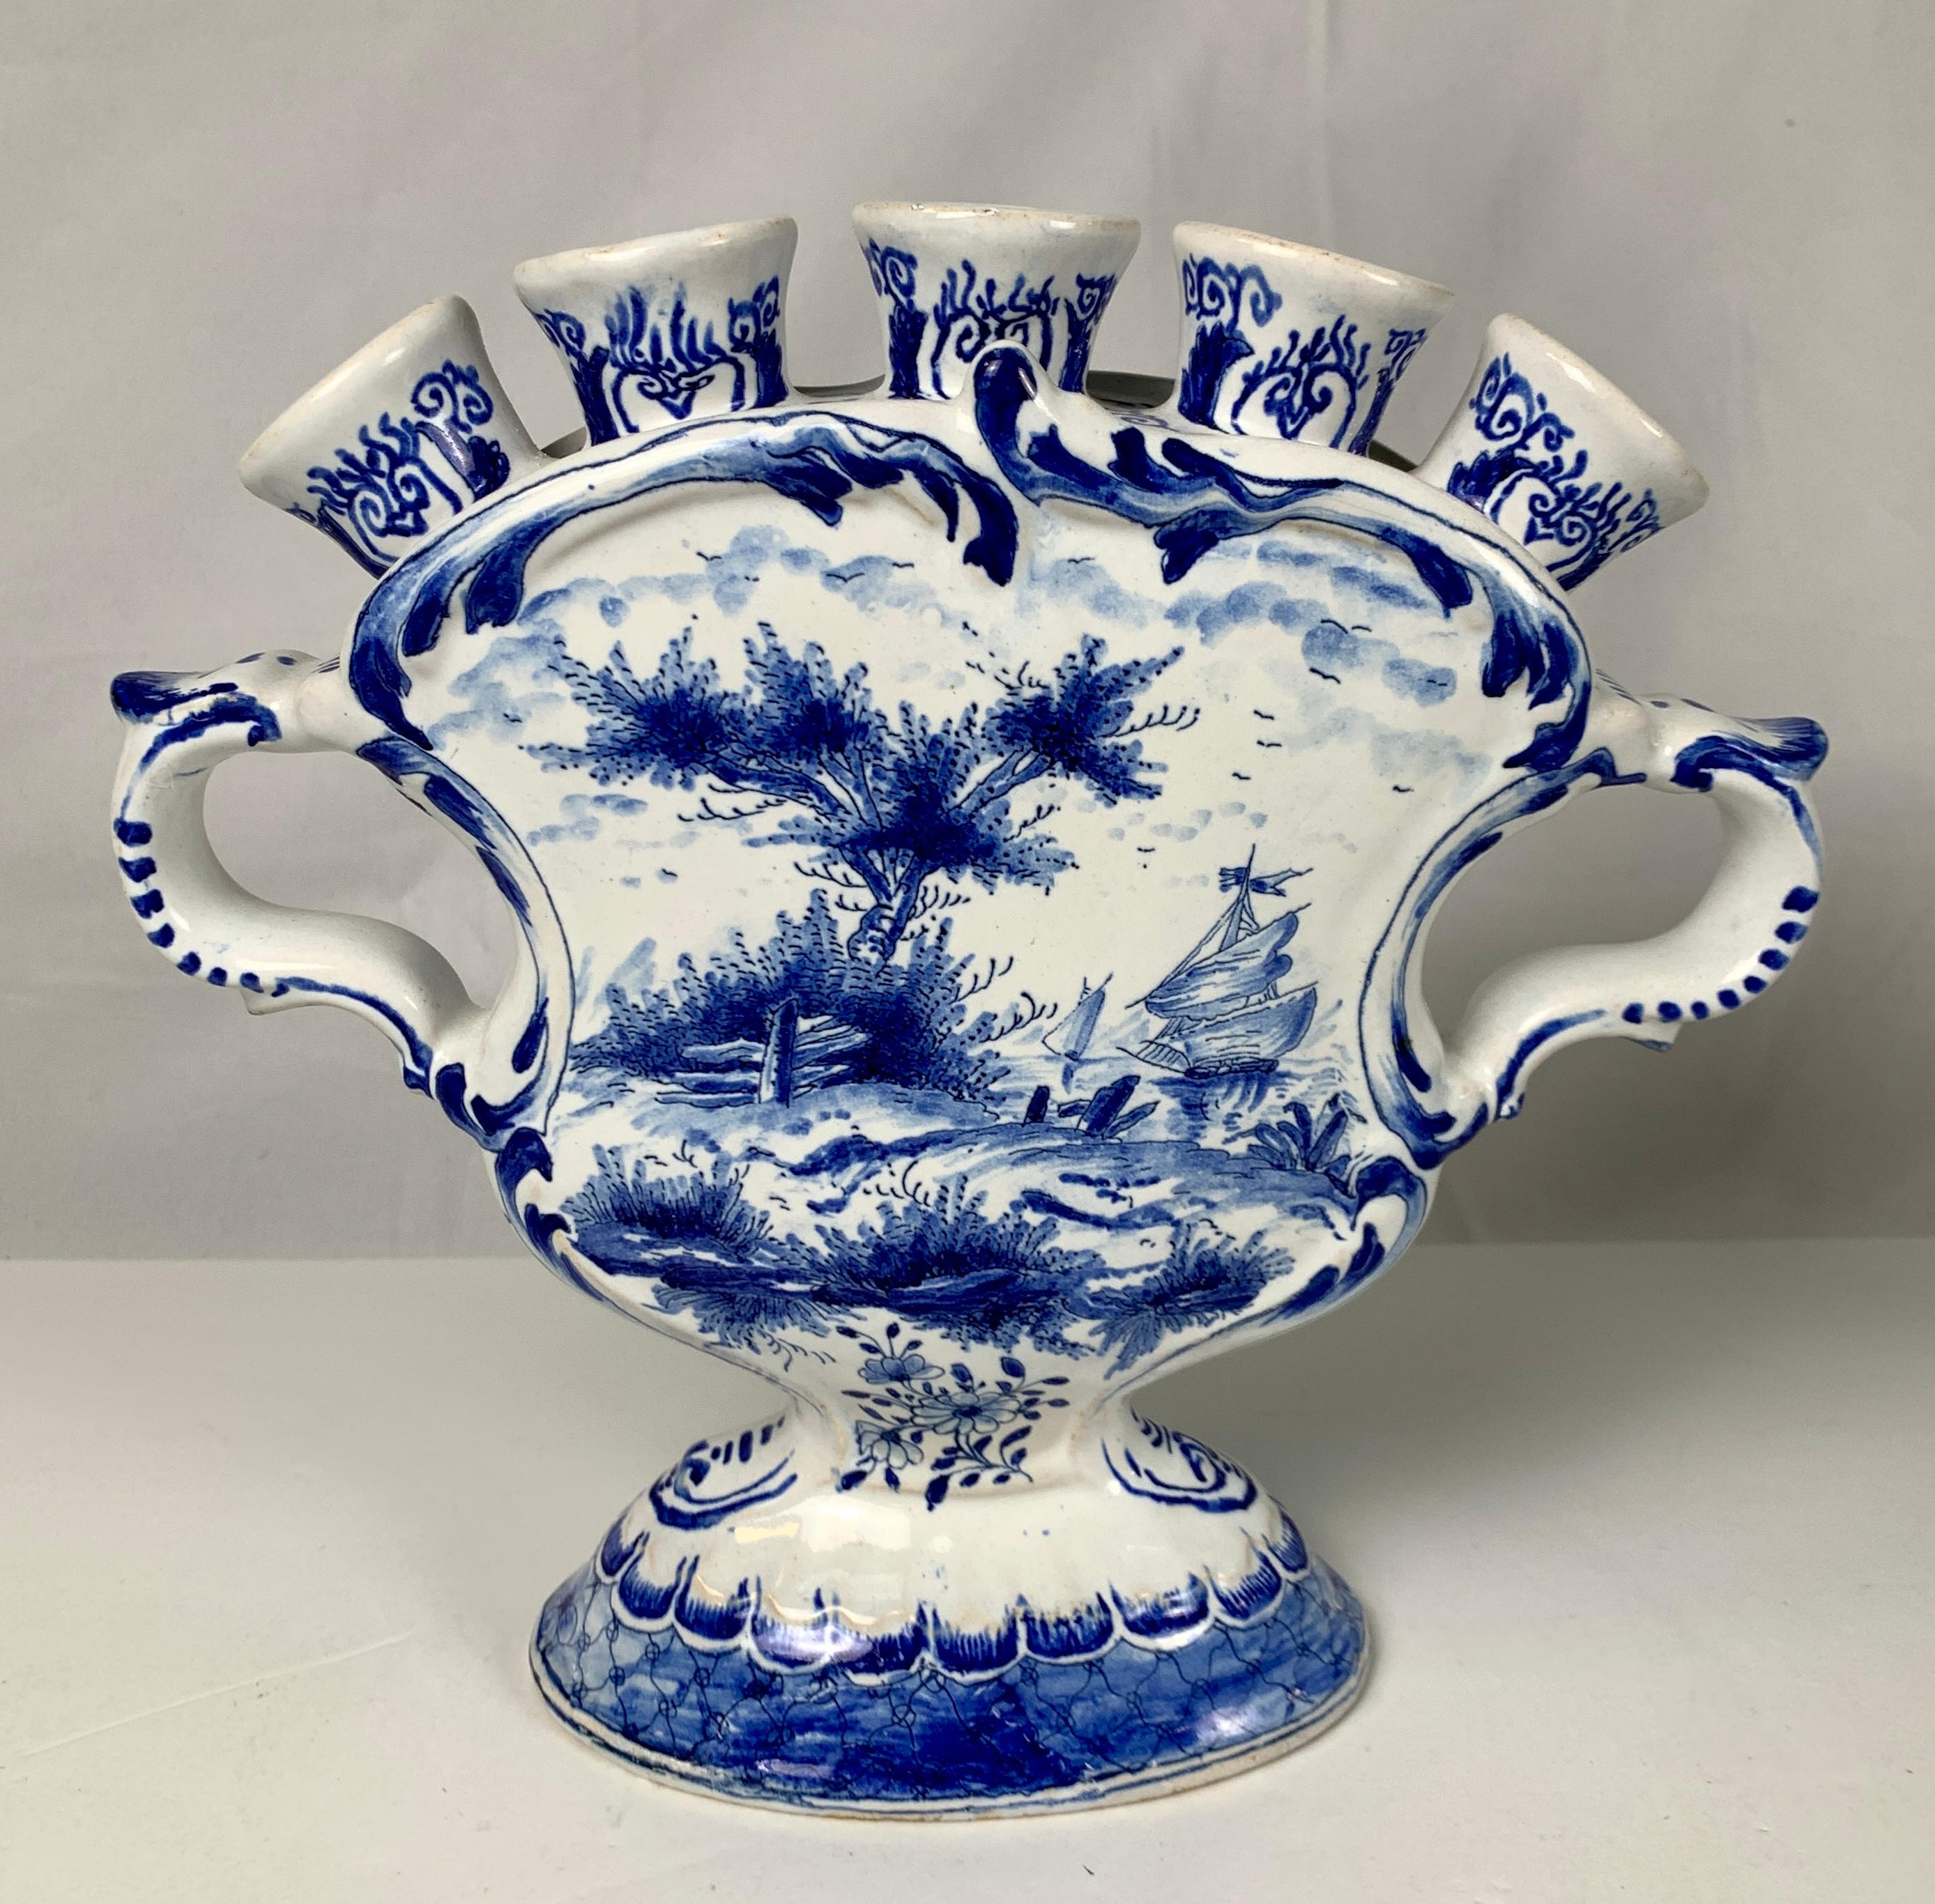 This blue and white Dutch Delft tulipiere or tulip holder shows a lovely romantic scene. 
We see a shepherdess delicately walking onto a stepping stone at the stream's edge.
The reverse shows sandy dunes and sailing ships gliding by in the water